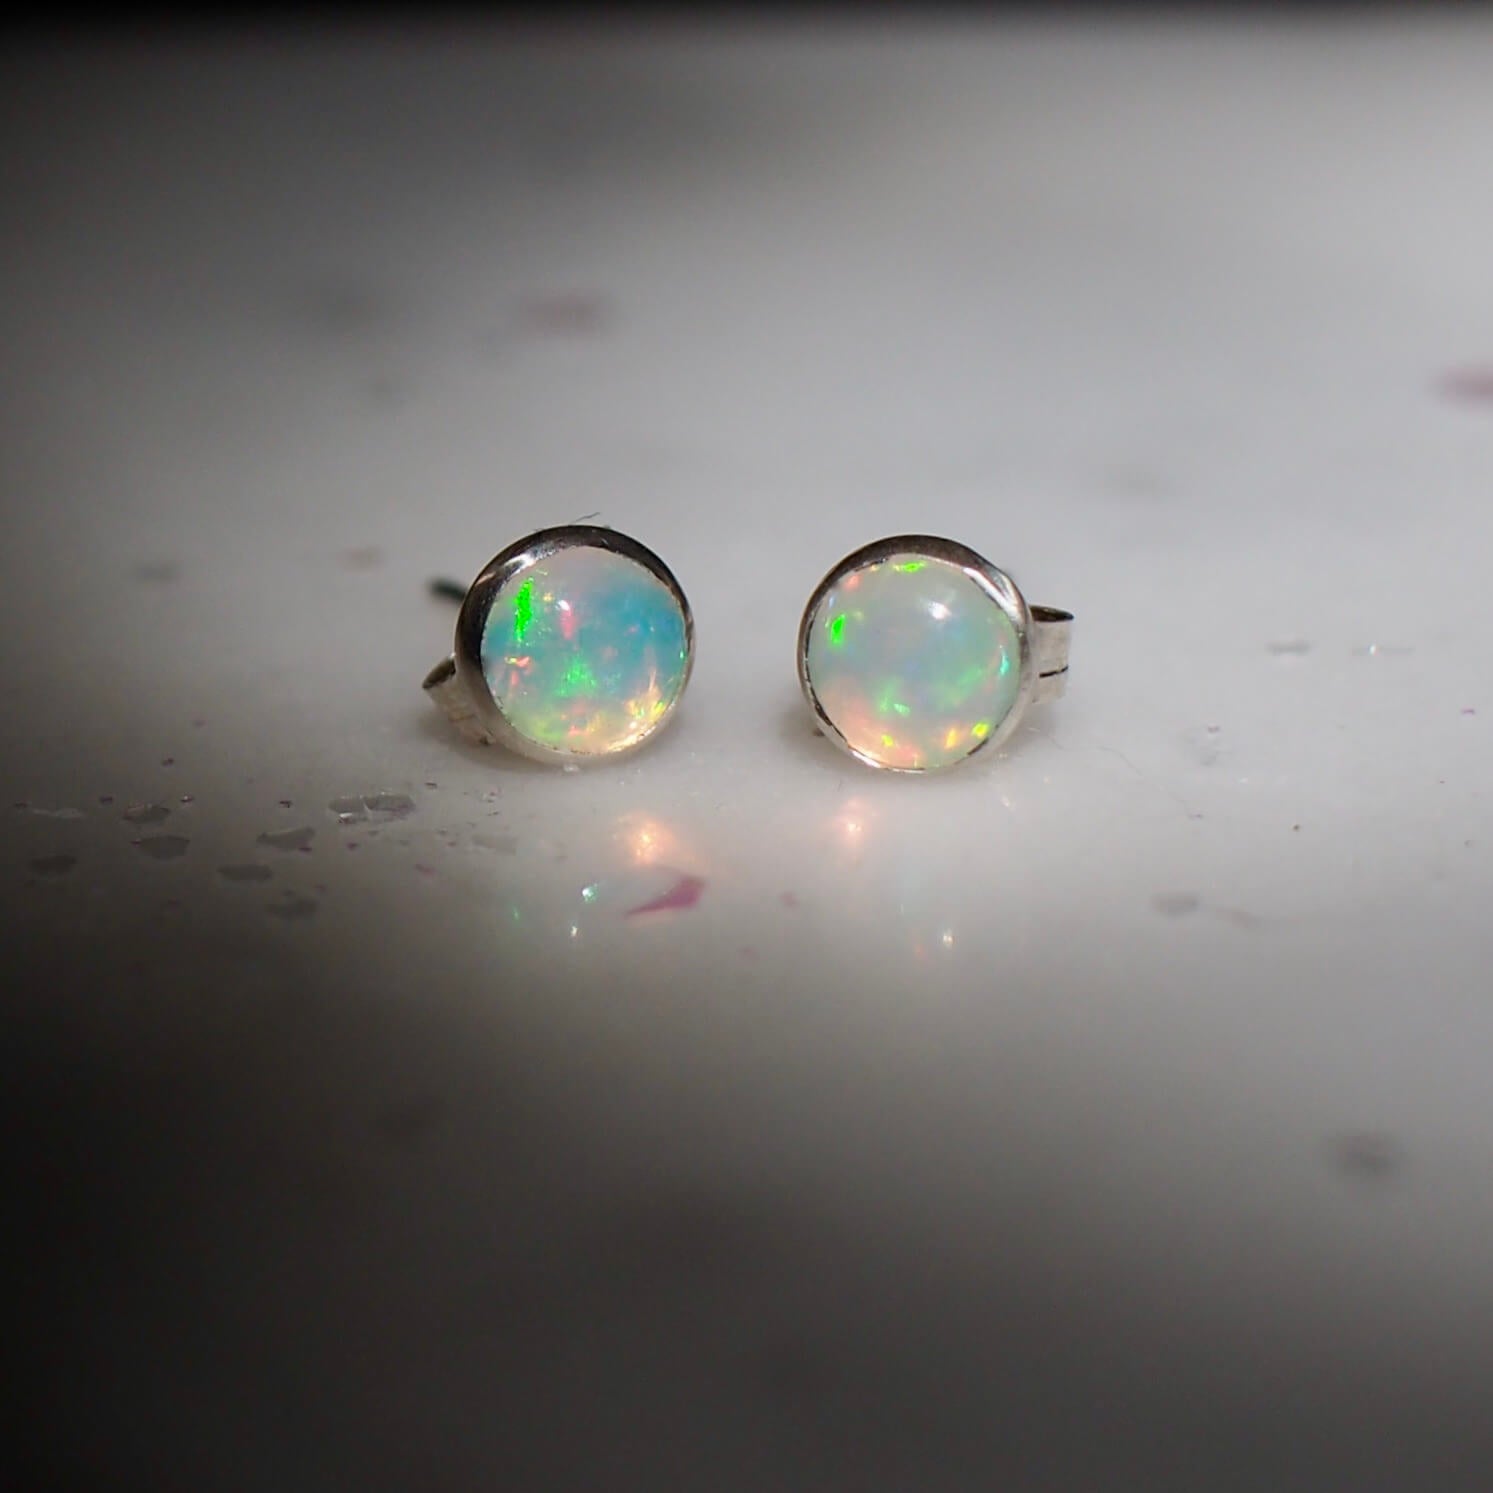 Sustainably sourced opal stud earrings in sterling silver and gold fill